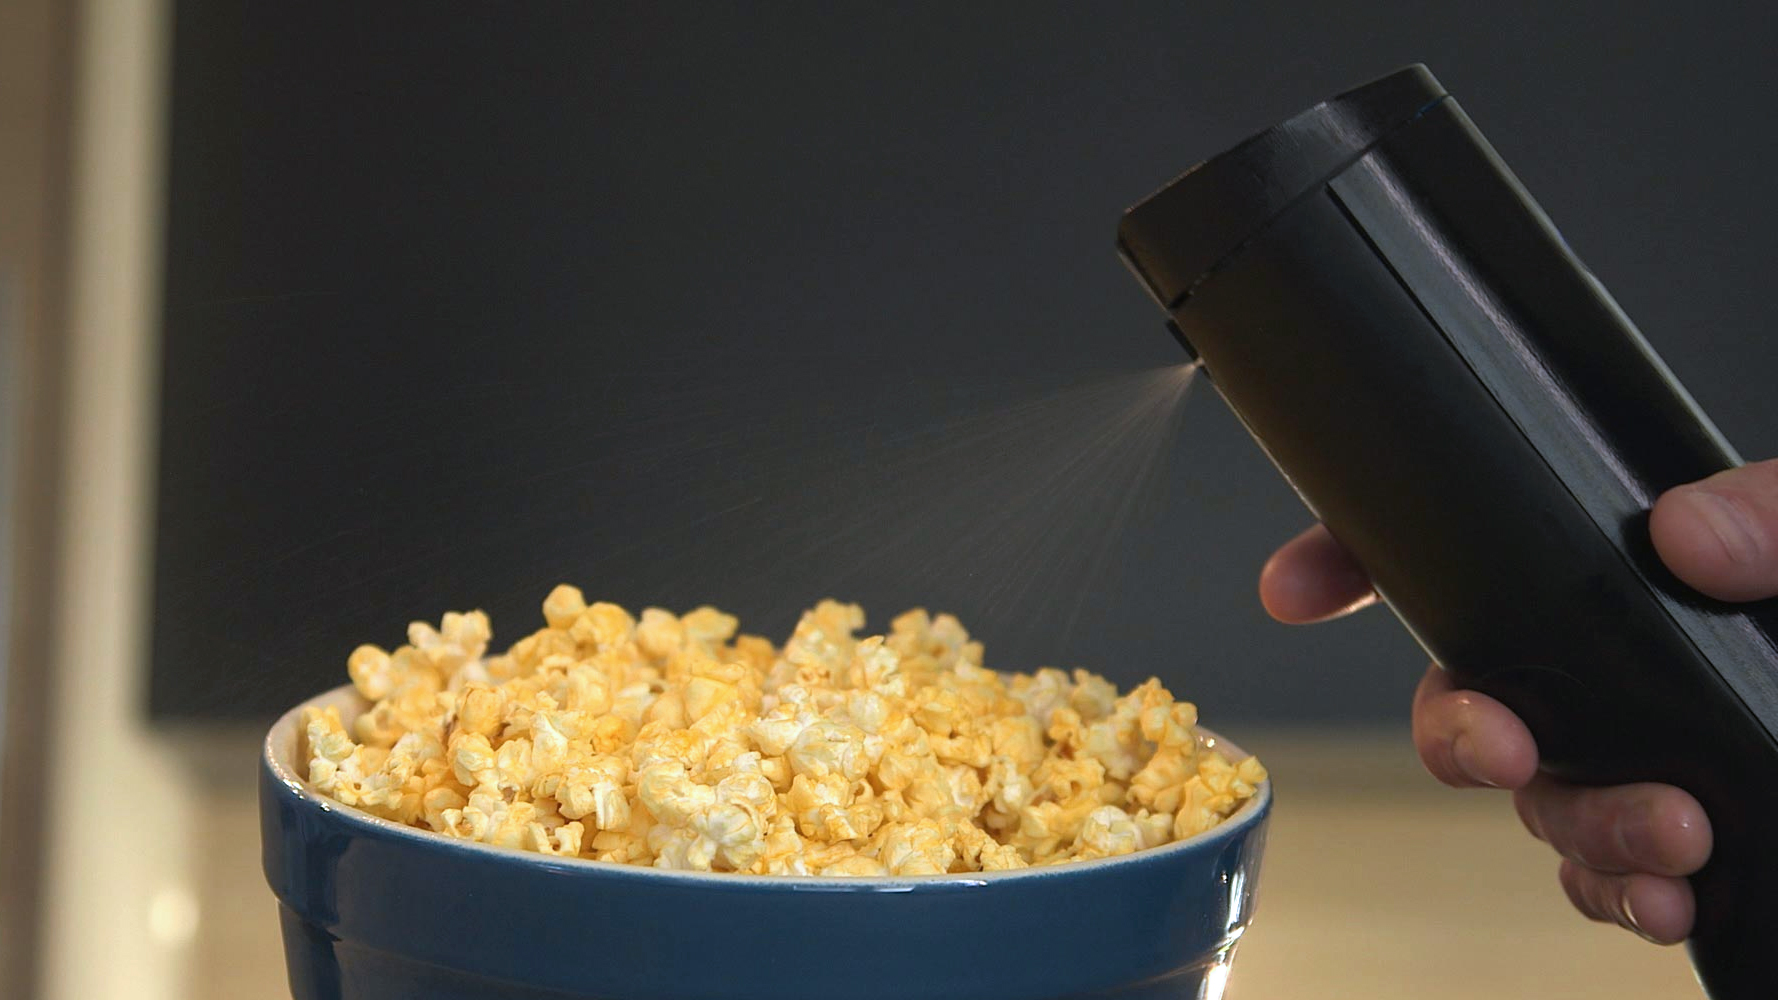 This Kitchen Tool Turns Sticks Of Butter Into Sprayable Deliciousness